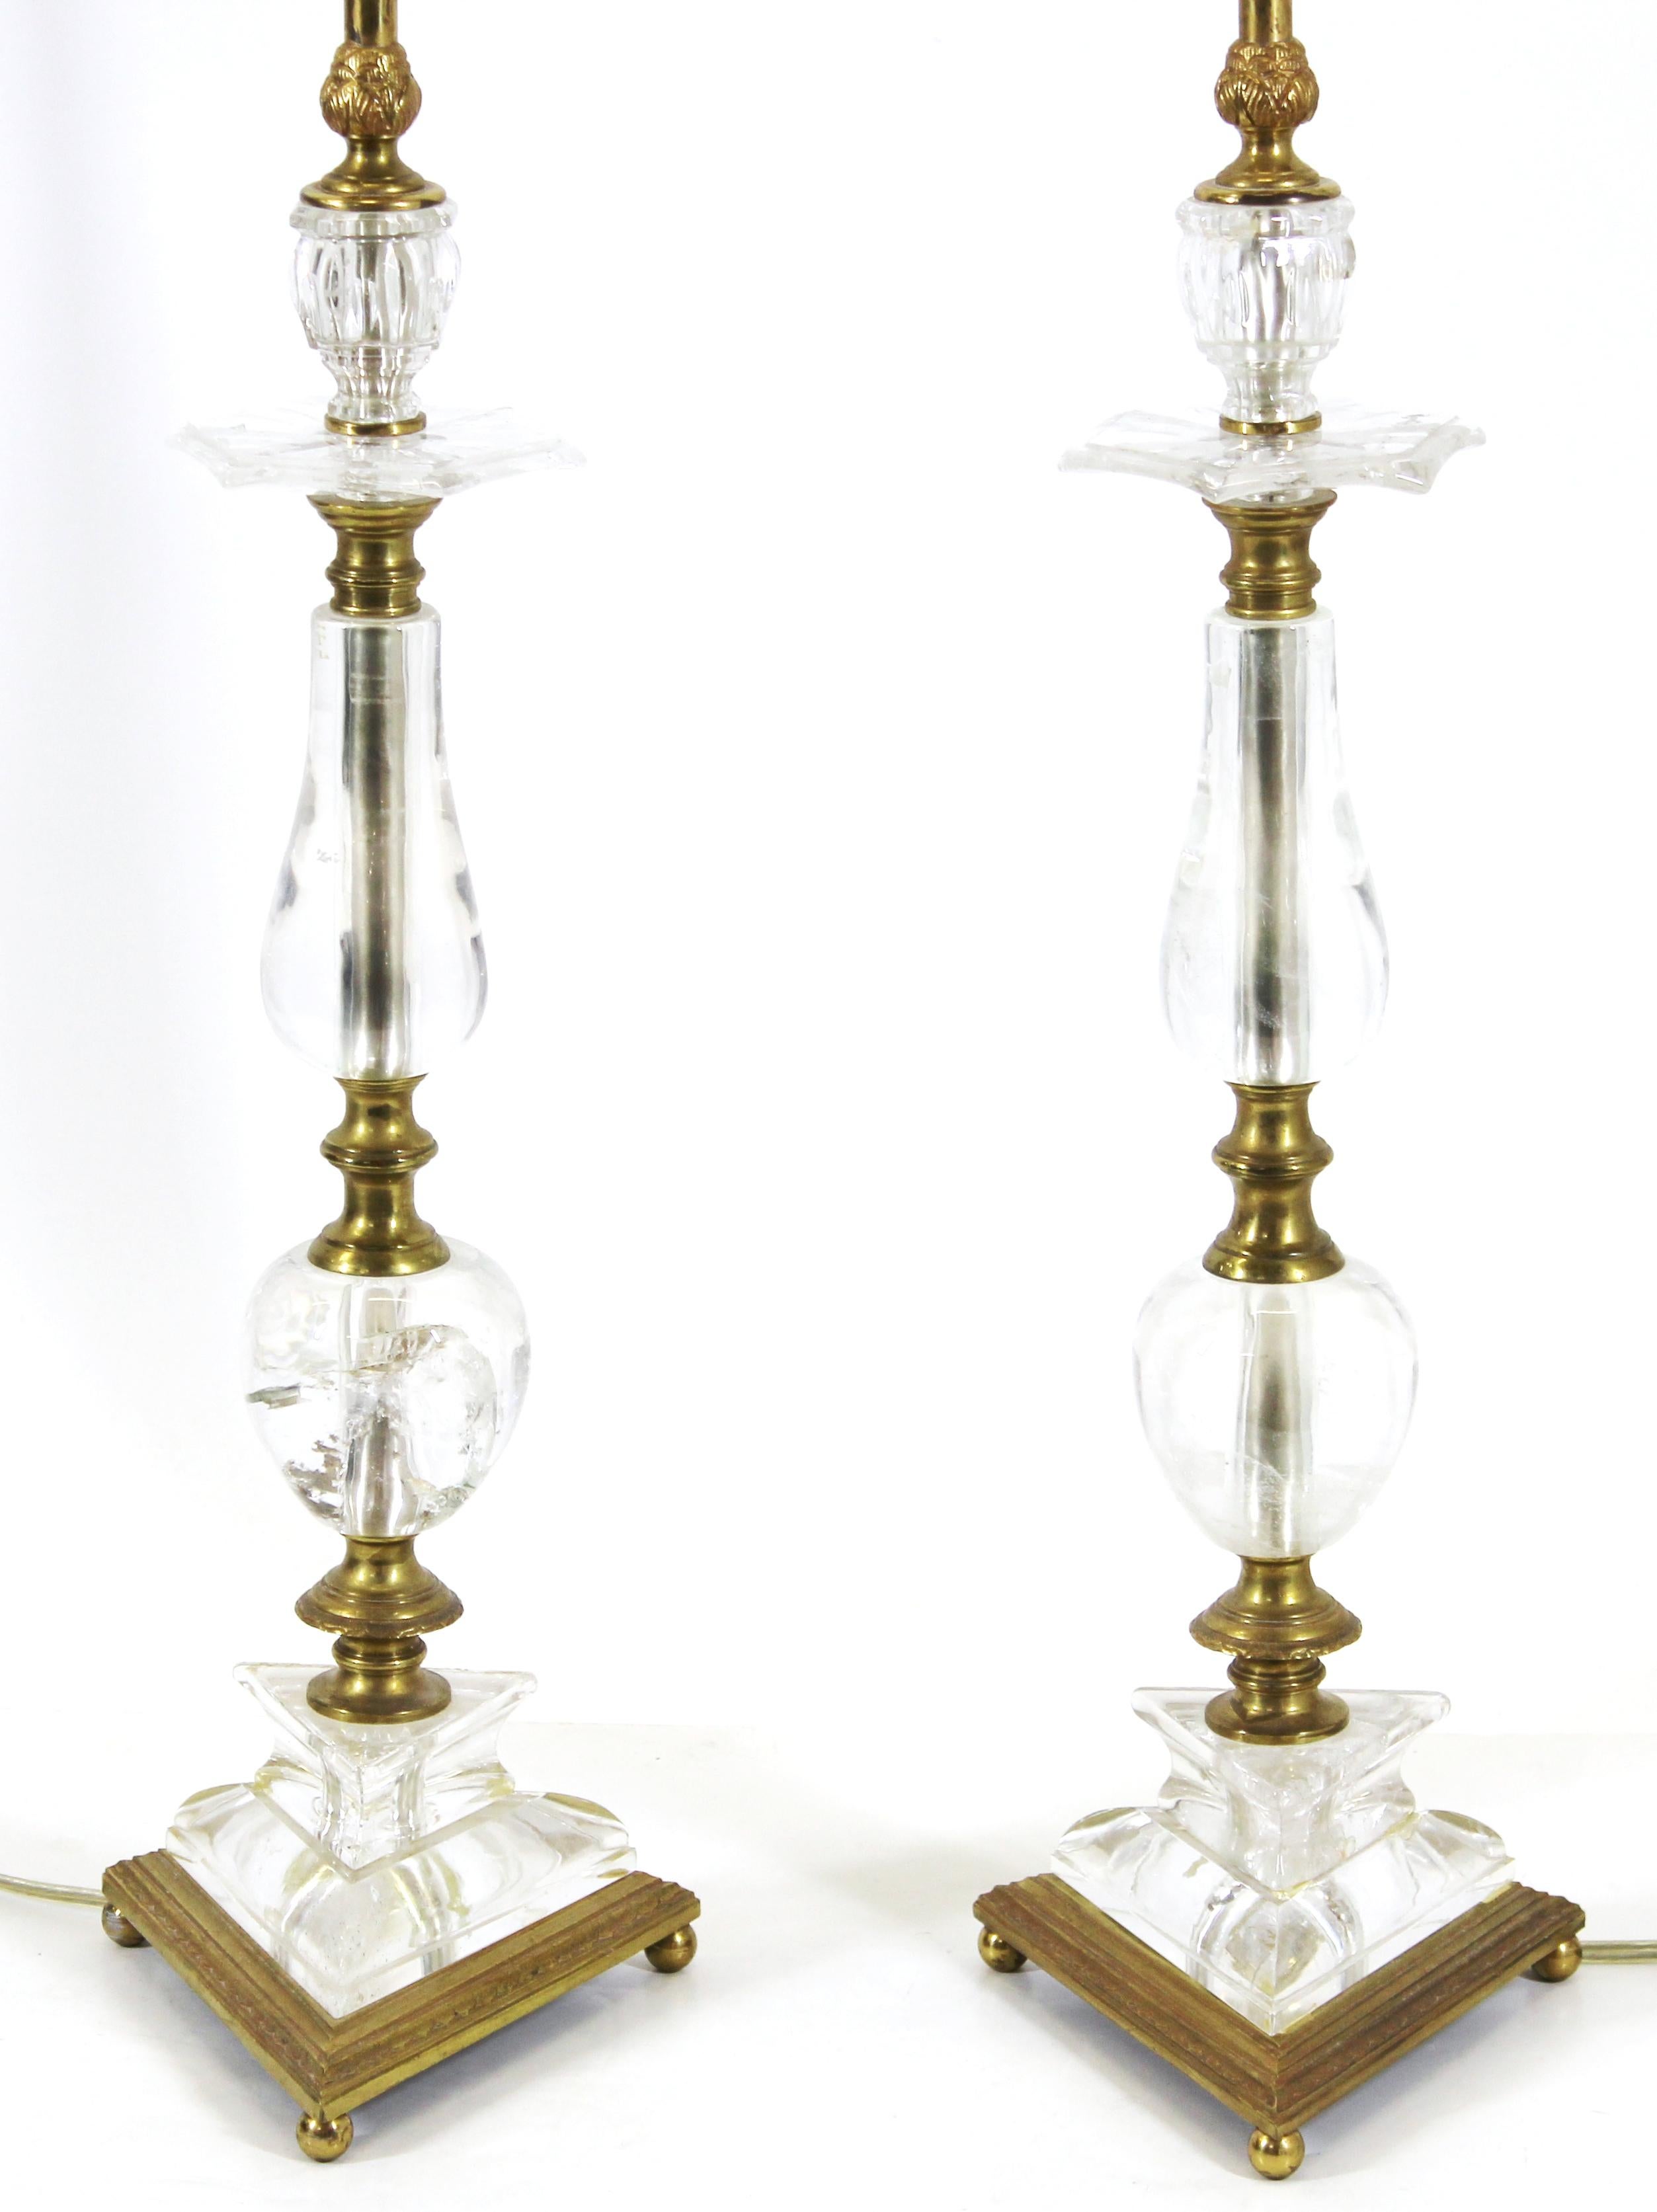 English Regency rock crystal and gilt bronze pair of candlesticks turned into table lamps, likely early to mid-19th century.